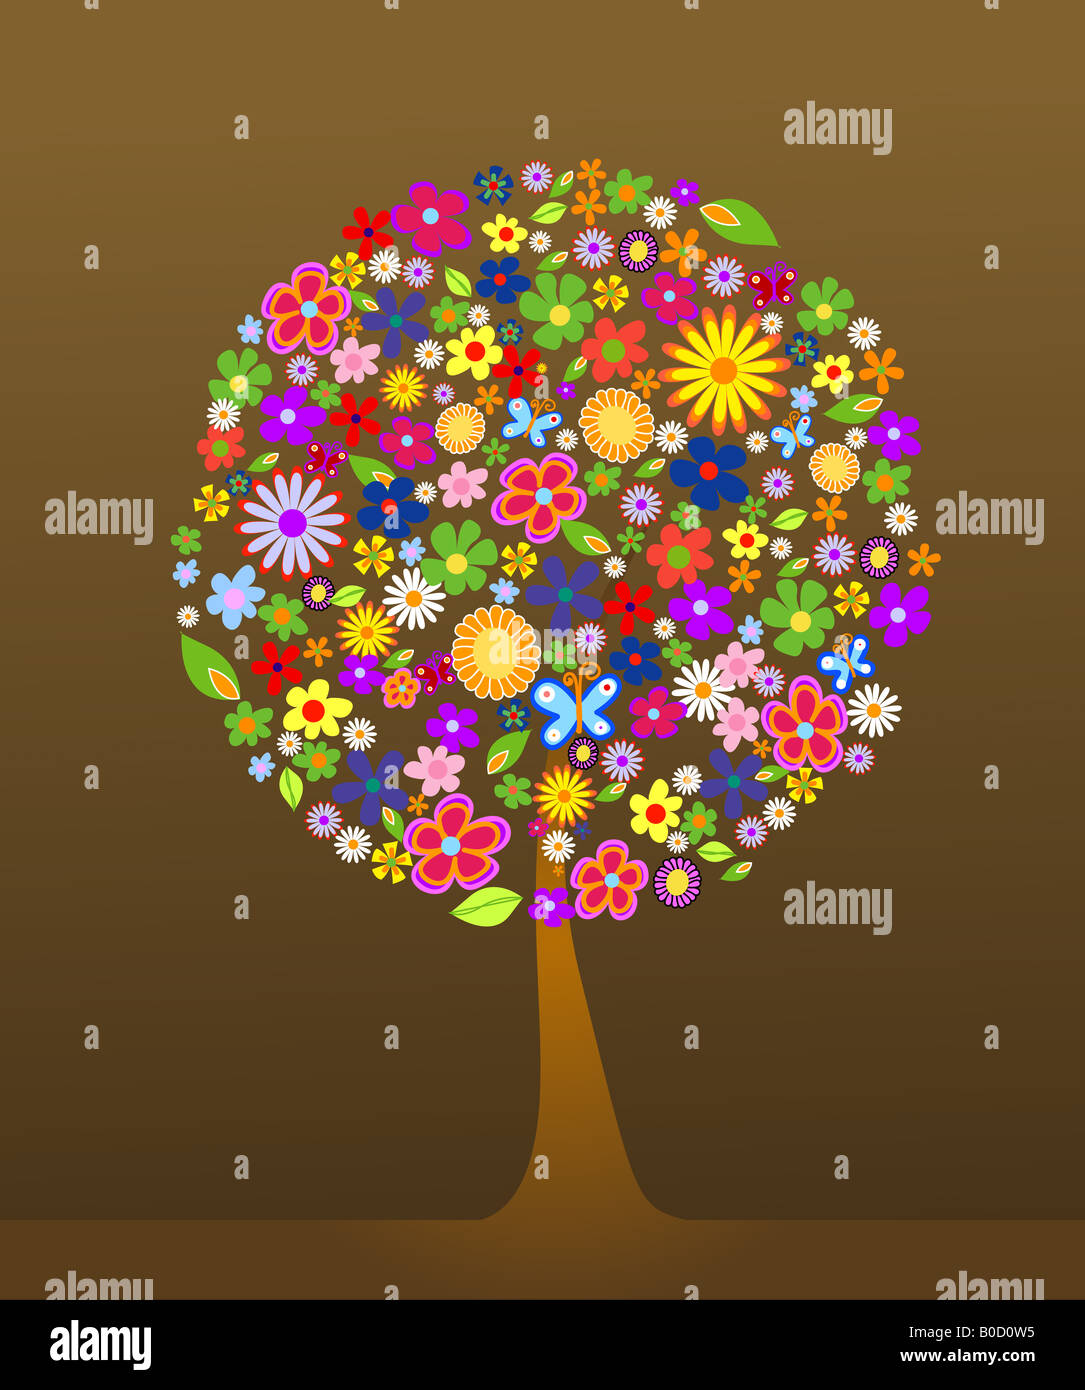 Colorful tree with flowers vector illustration Stock Photo